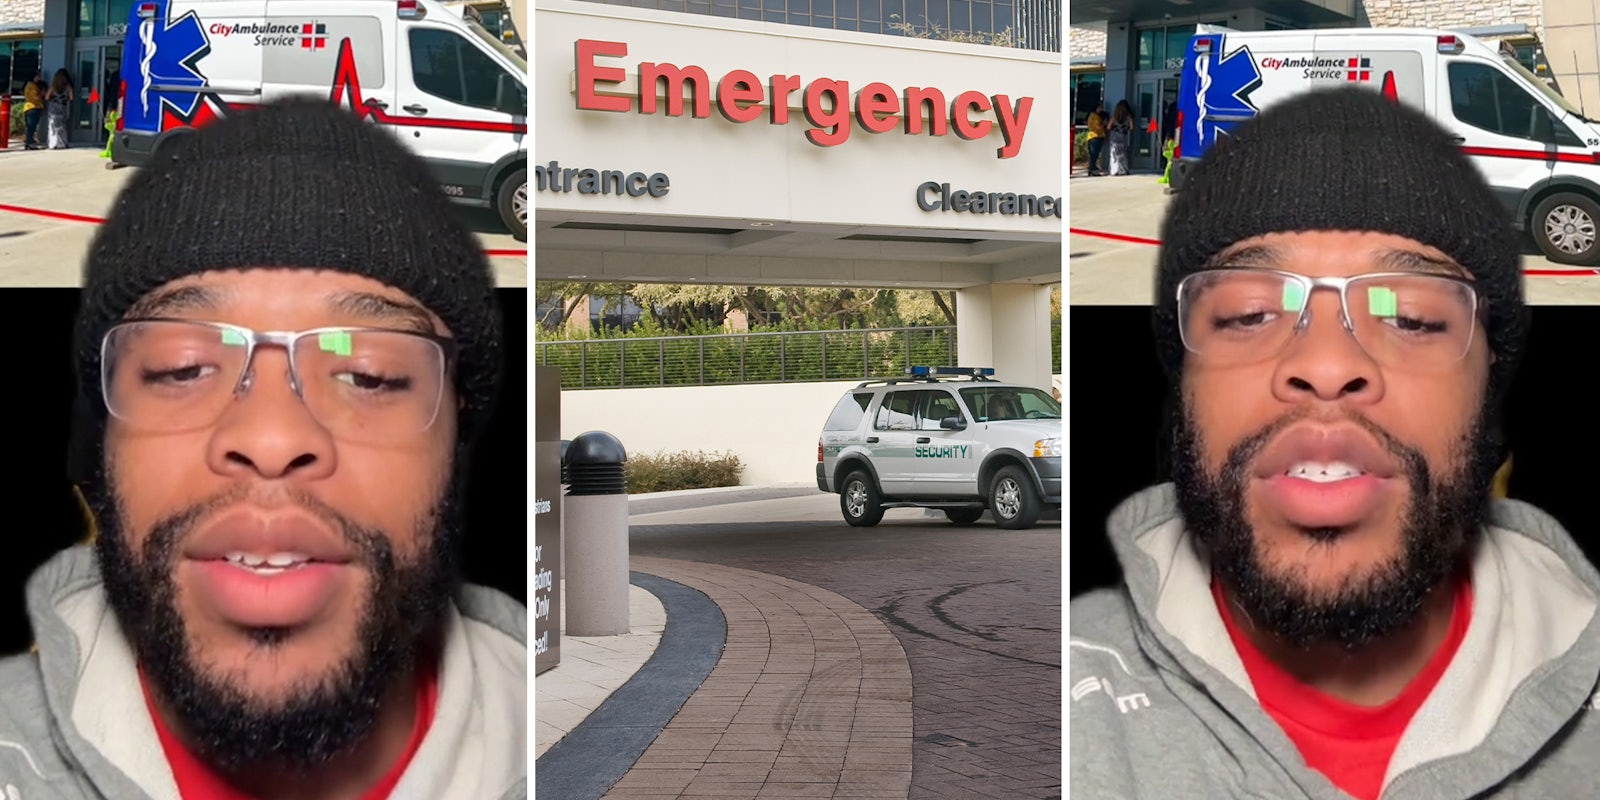 Man shares 'unethical life hack' ti getting free emergency room visit